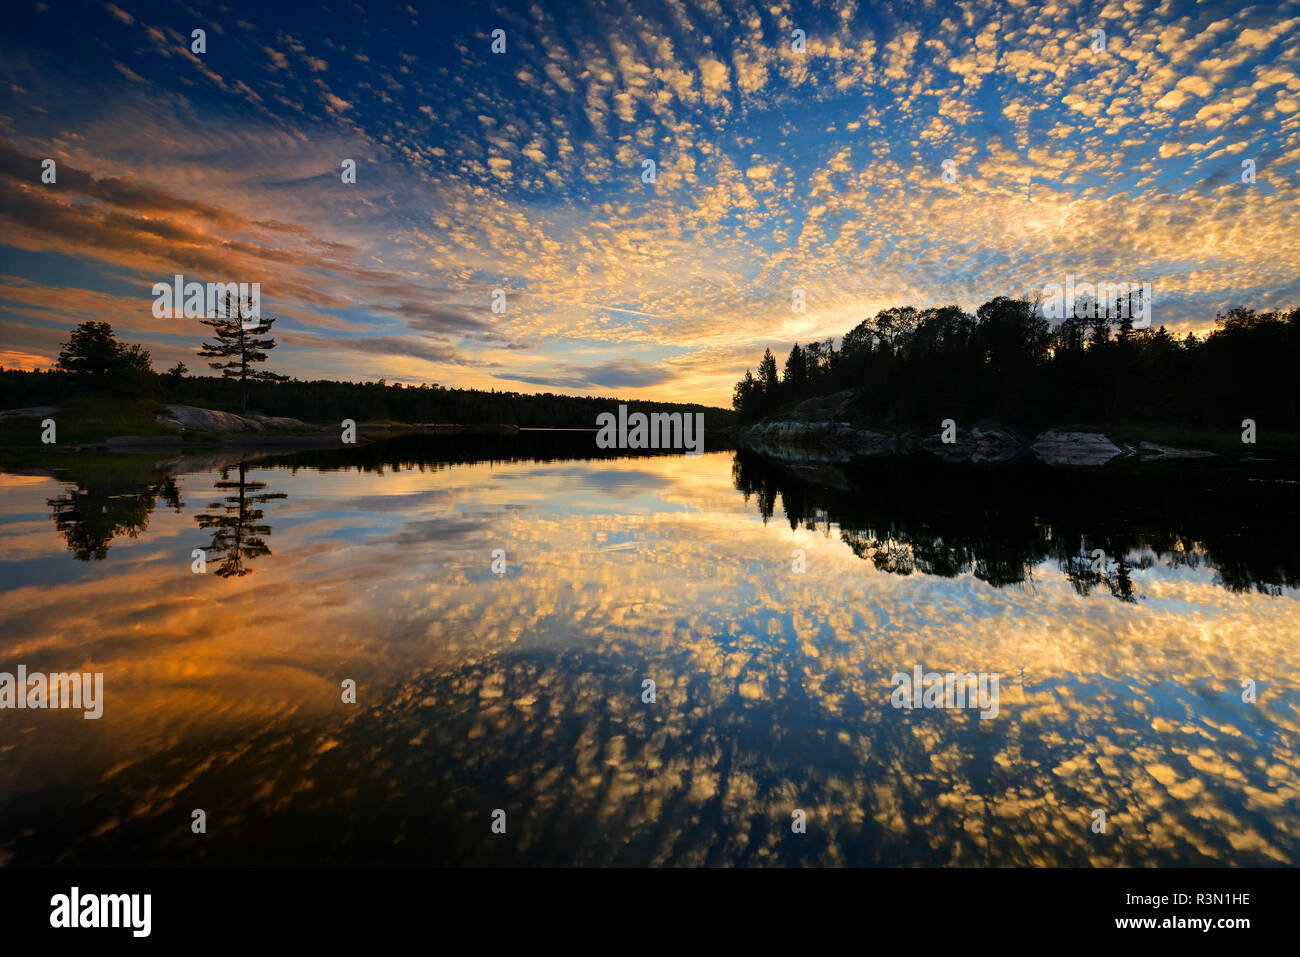 Canada, Ontario, Kenora. Reflections in Middle Lake at sunset. Stock Photo